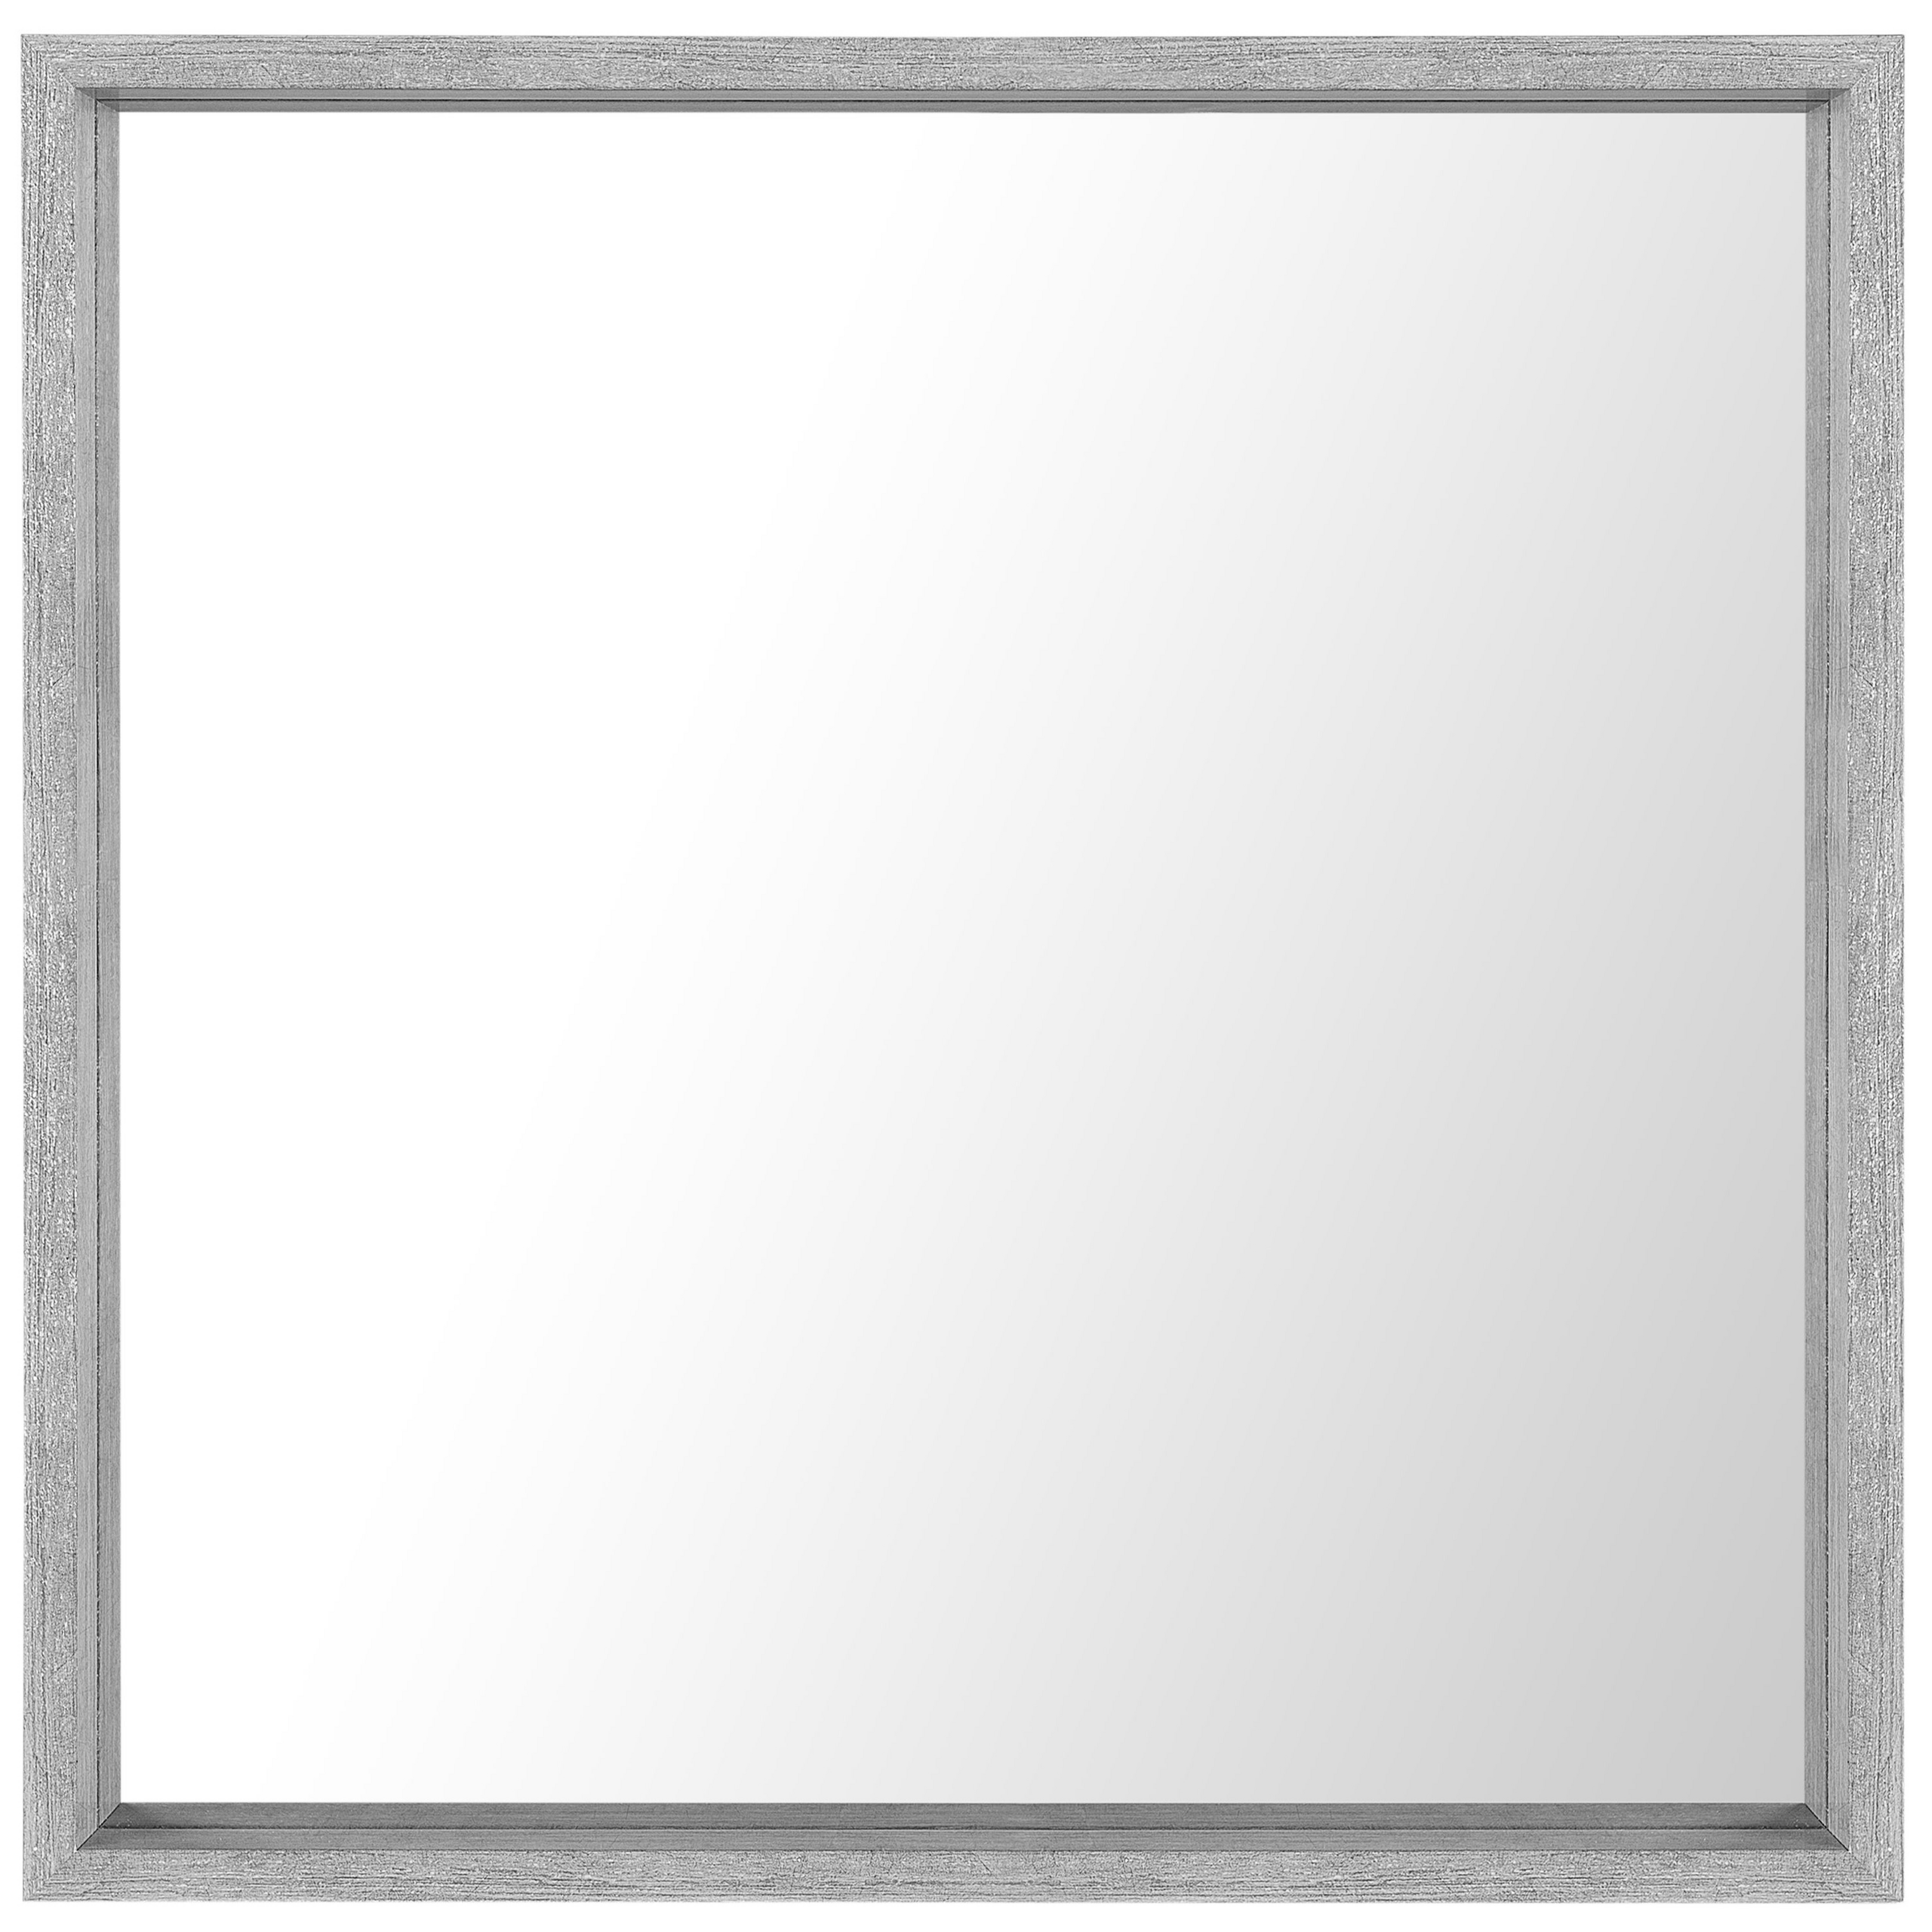 Beliani Wall Mirror Grey Synthetic Frame 50 x 50 cm Square Wall Hanging